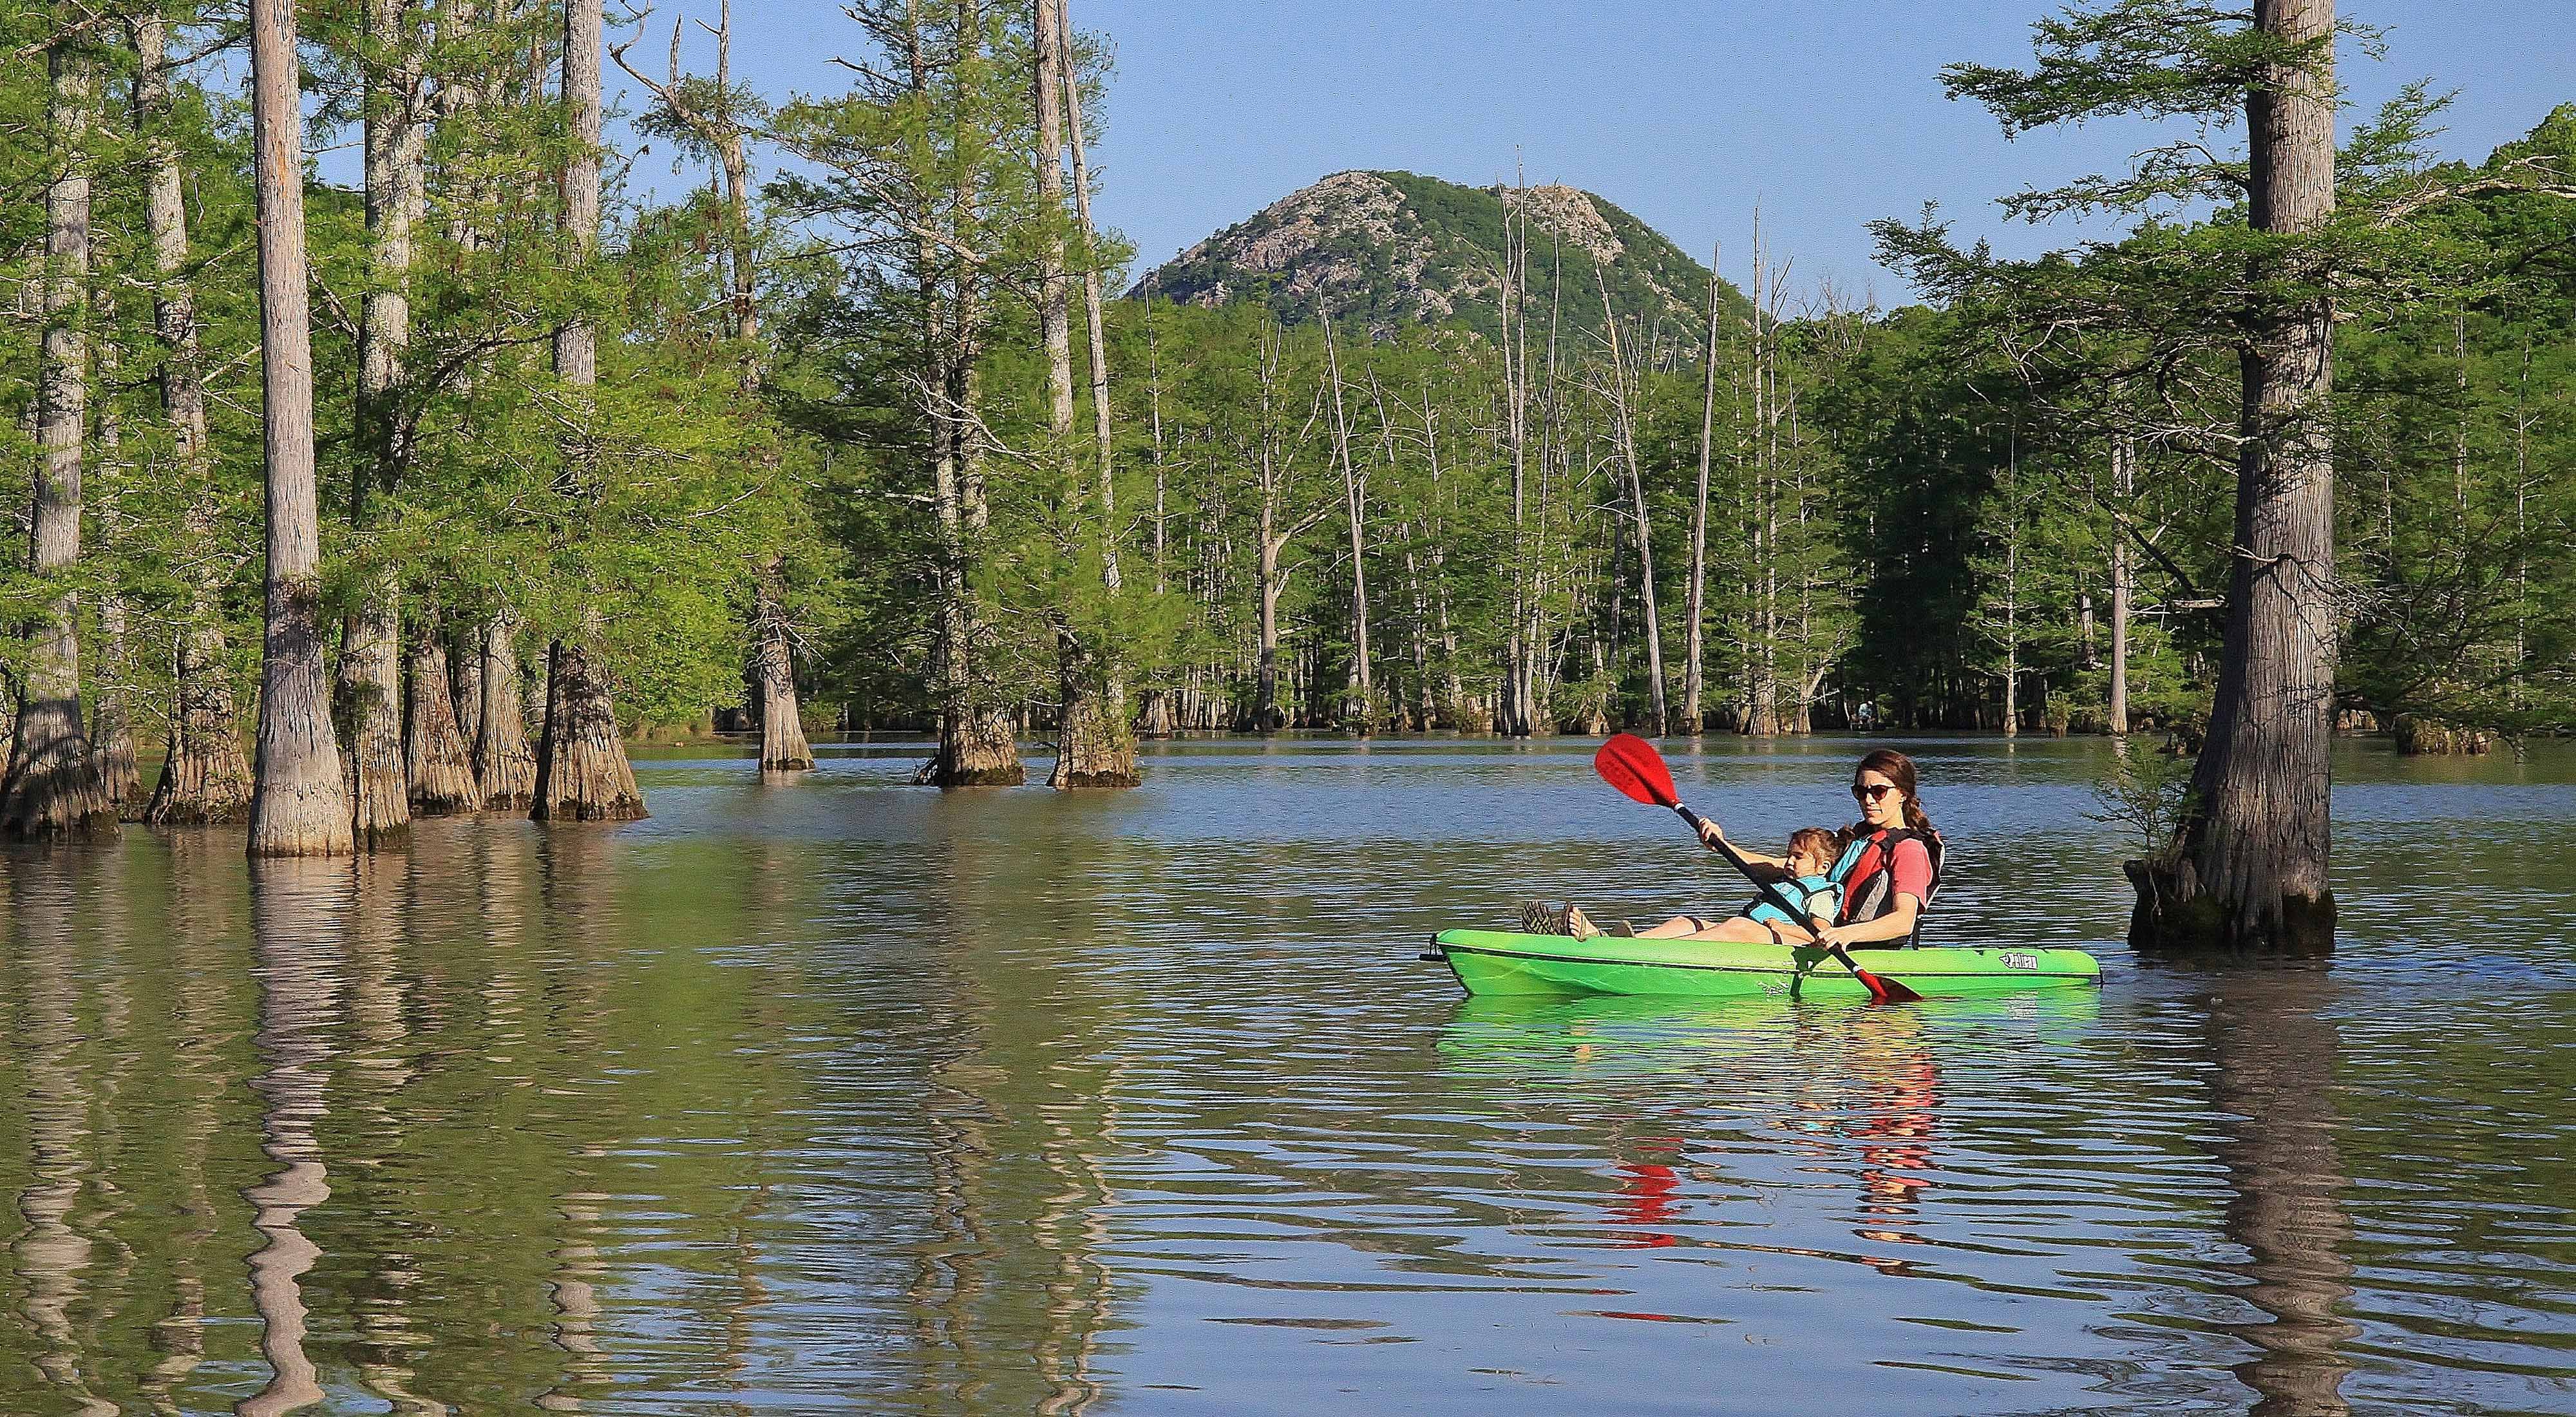 A woman and child in a kayak exploring a swampy area with cypress trees growing out of the water and a rocky hill in the background.